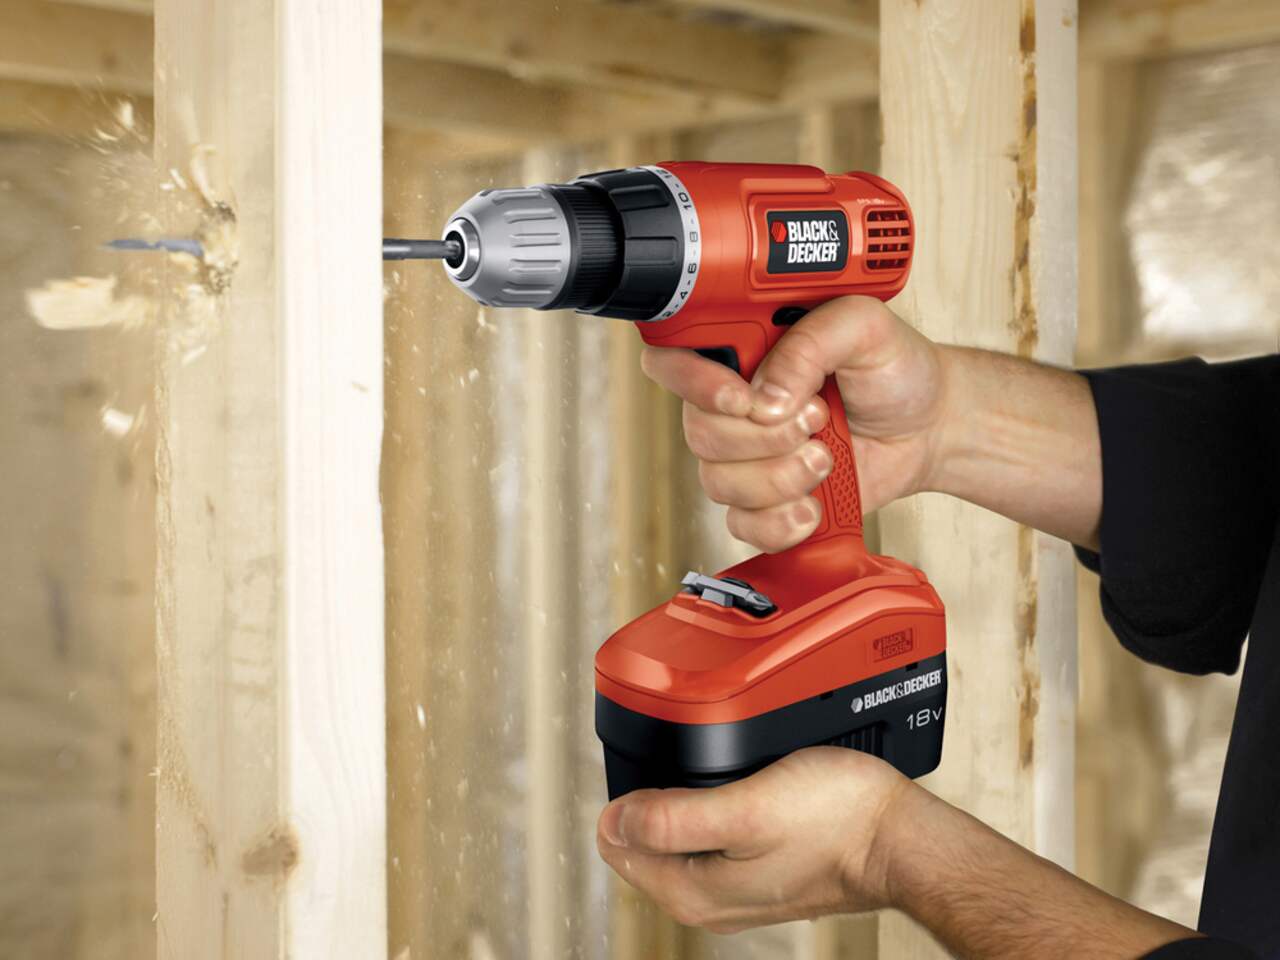 https://media-www.canadiantire.ca/product/fixing/tools/portable-power-tools/0542955/black-decker-18v-drill-w-100-piece-accessory-kit-d8e994e4-54d0-4264-b1b8-7e653ff3dbdc.png?imdensity=1&imwidth=1244&impolicy=mZoom